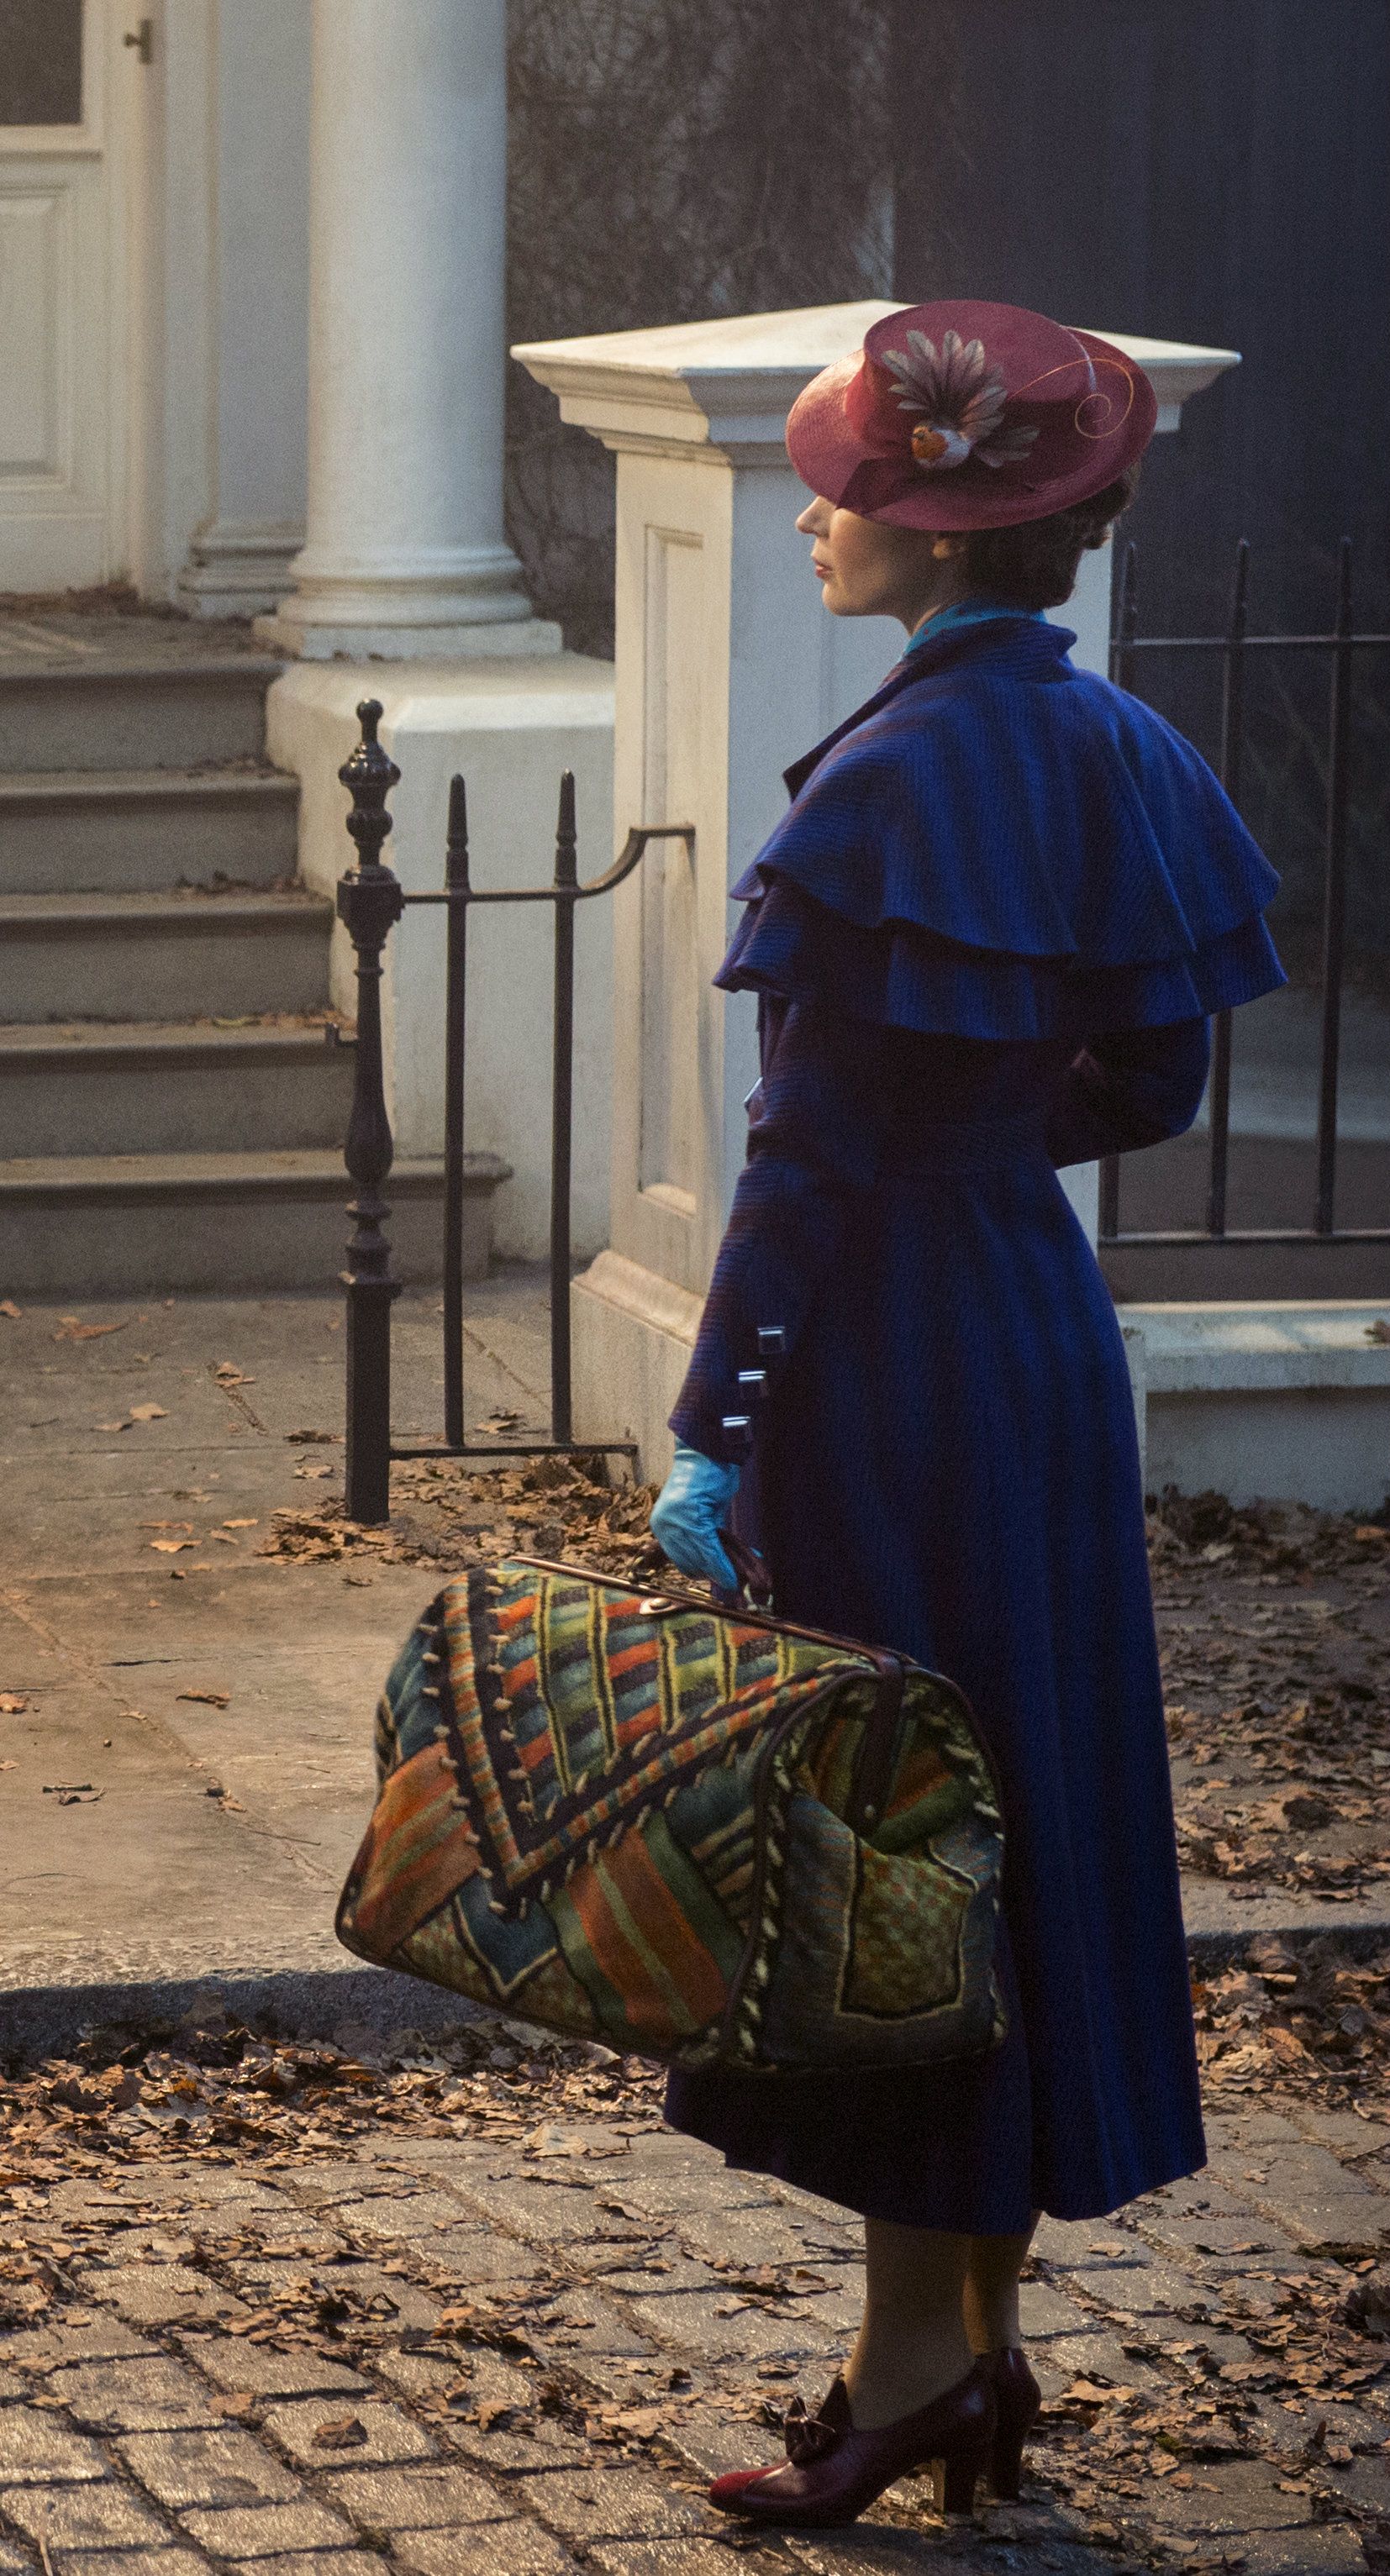 Mary Poppins 2 First Look: Emily Blunt is Practically Perfect